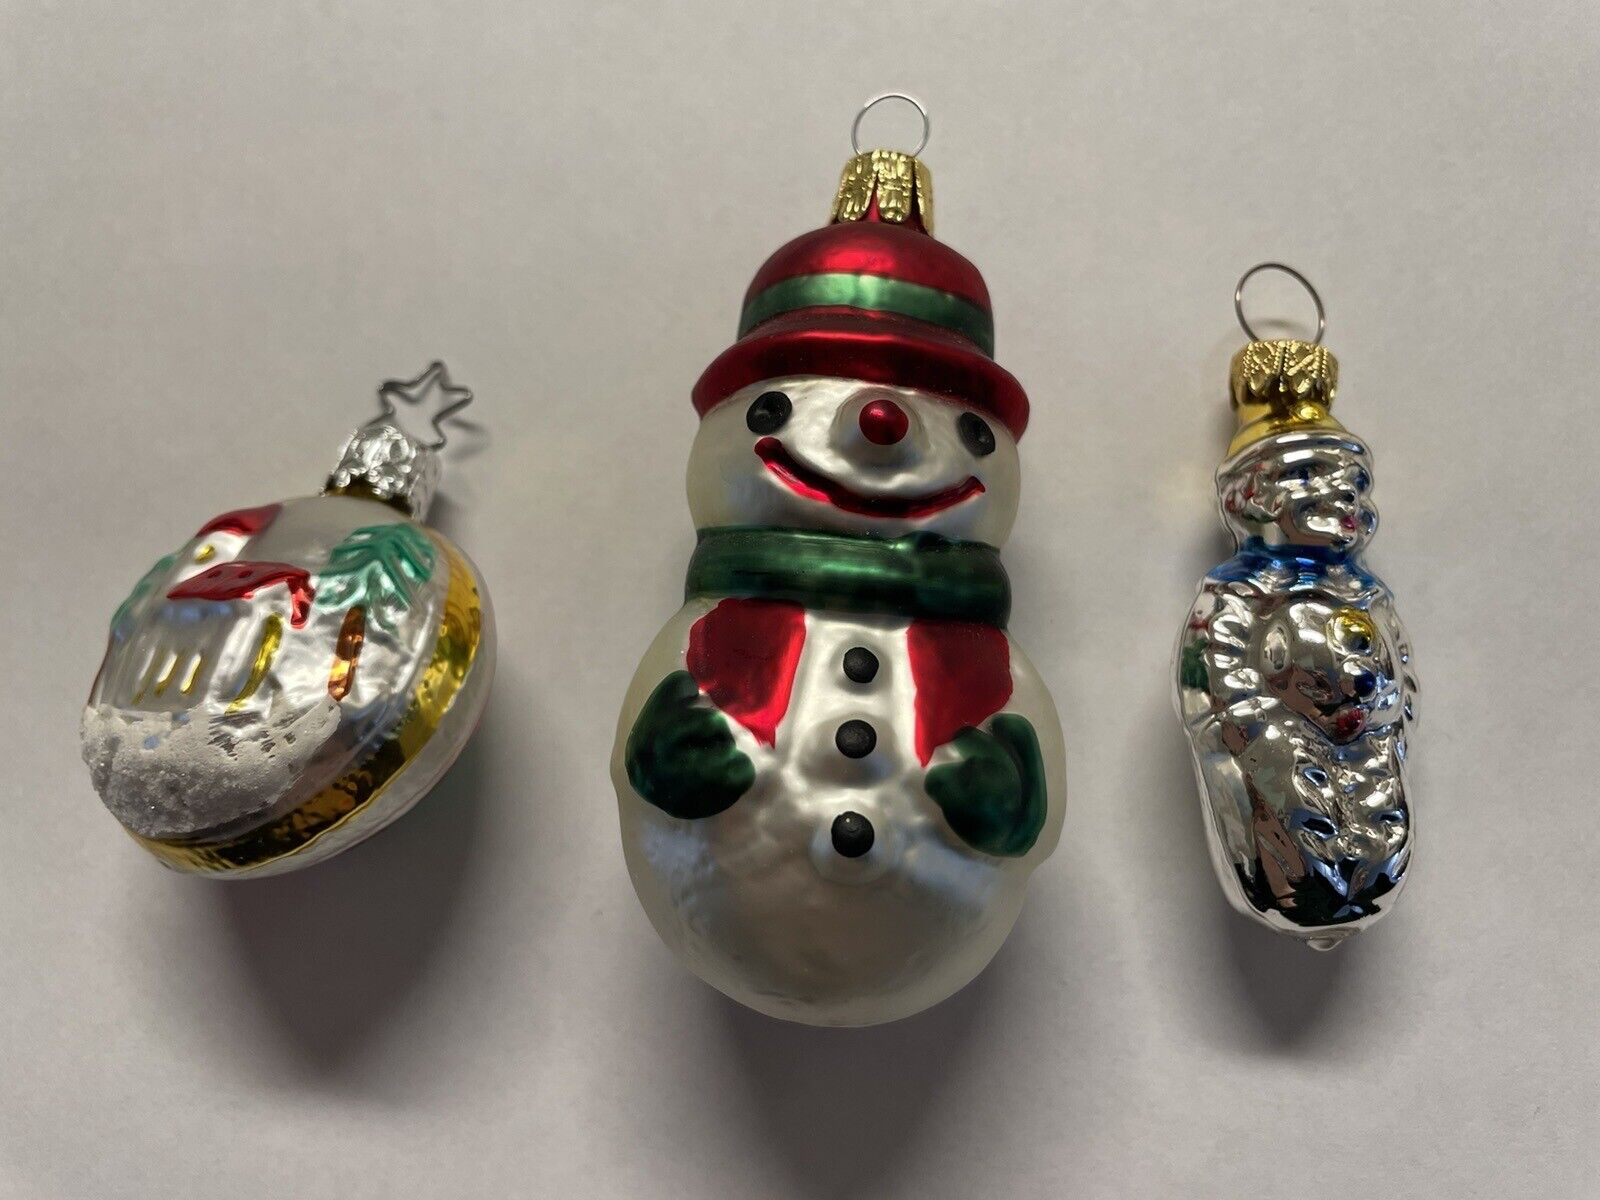 Old world west Germany unique glass blown Christmas ornaments lot of 3